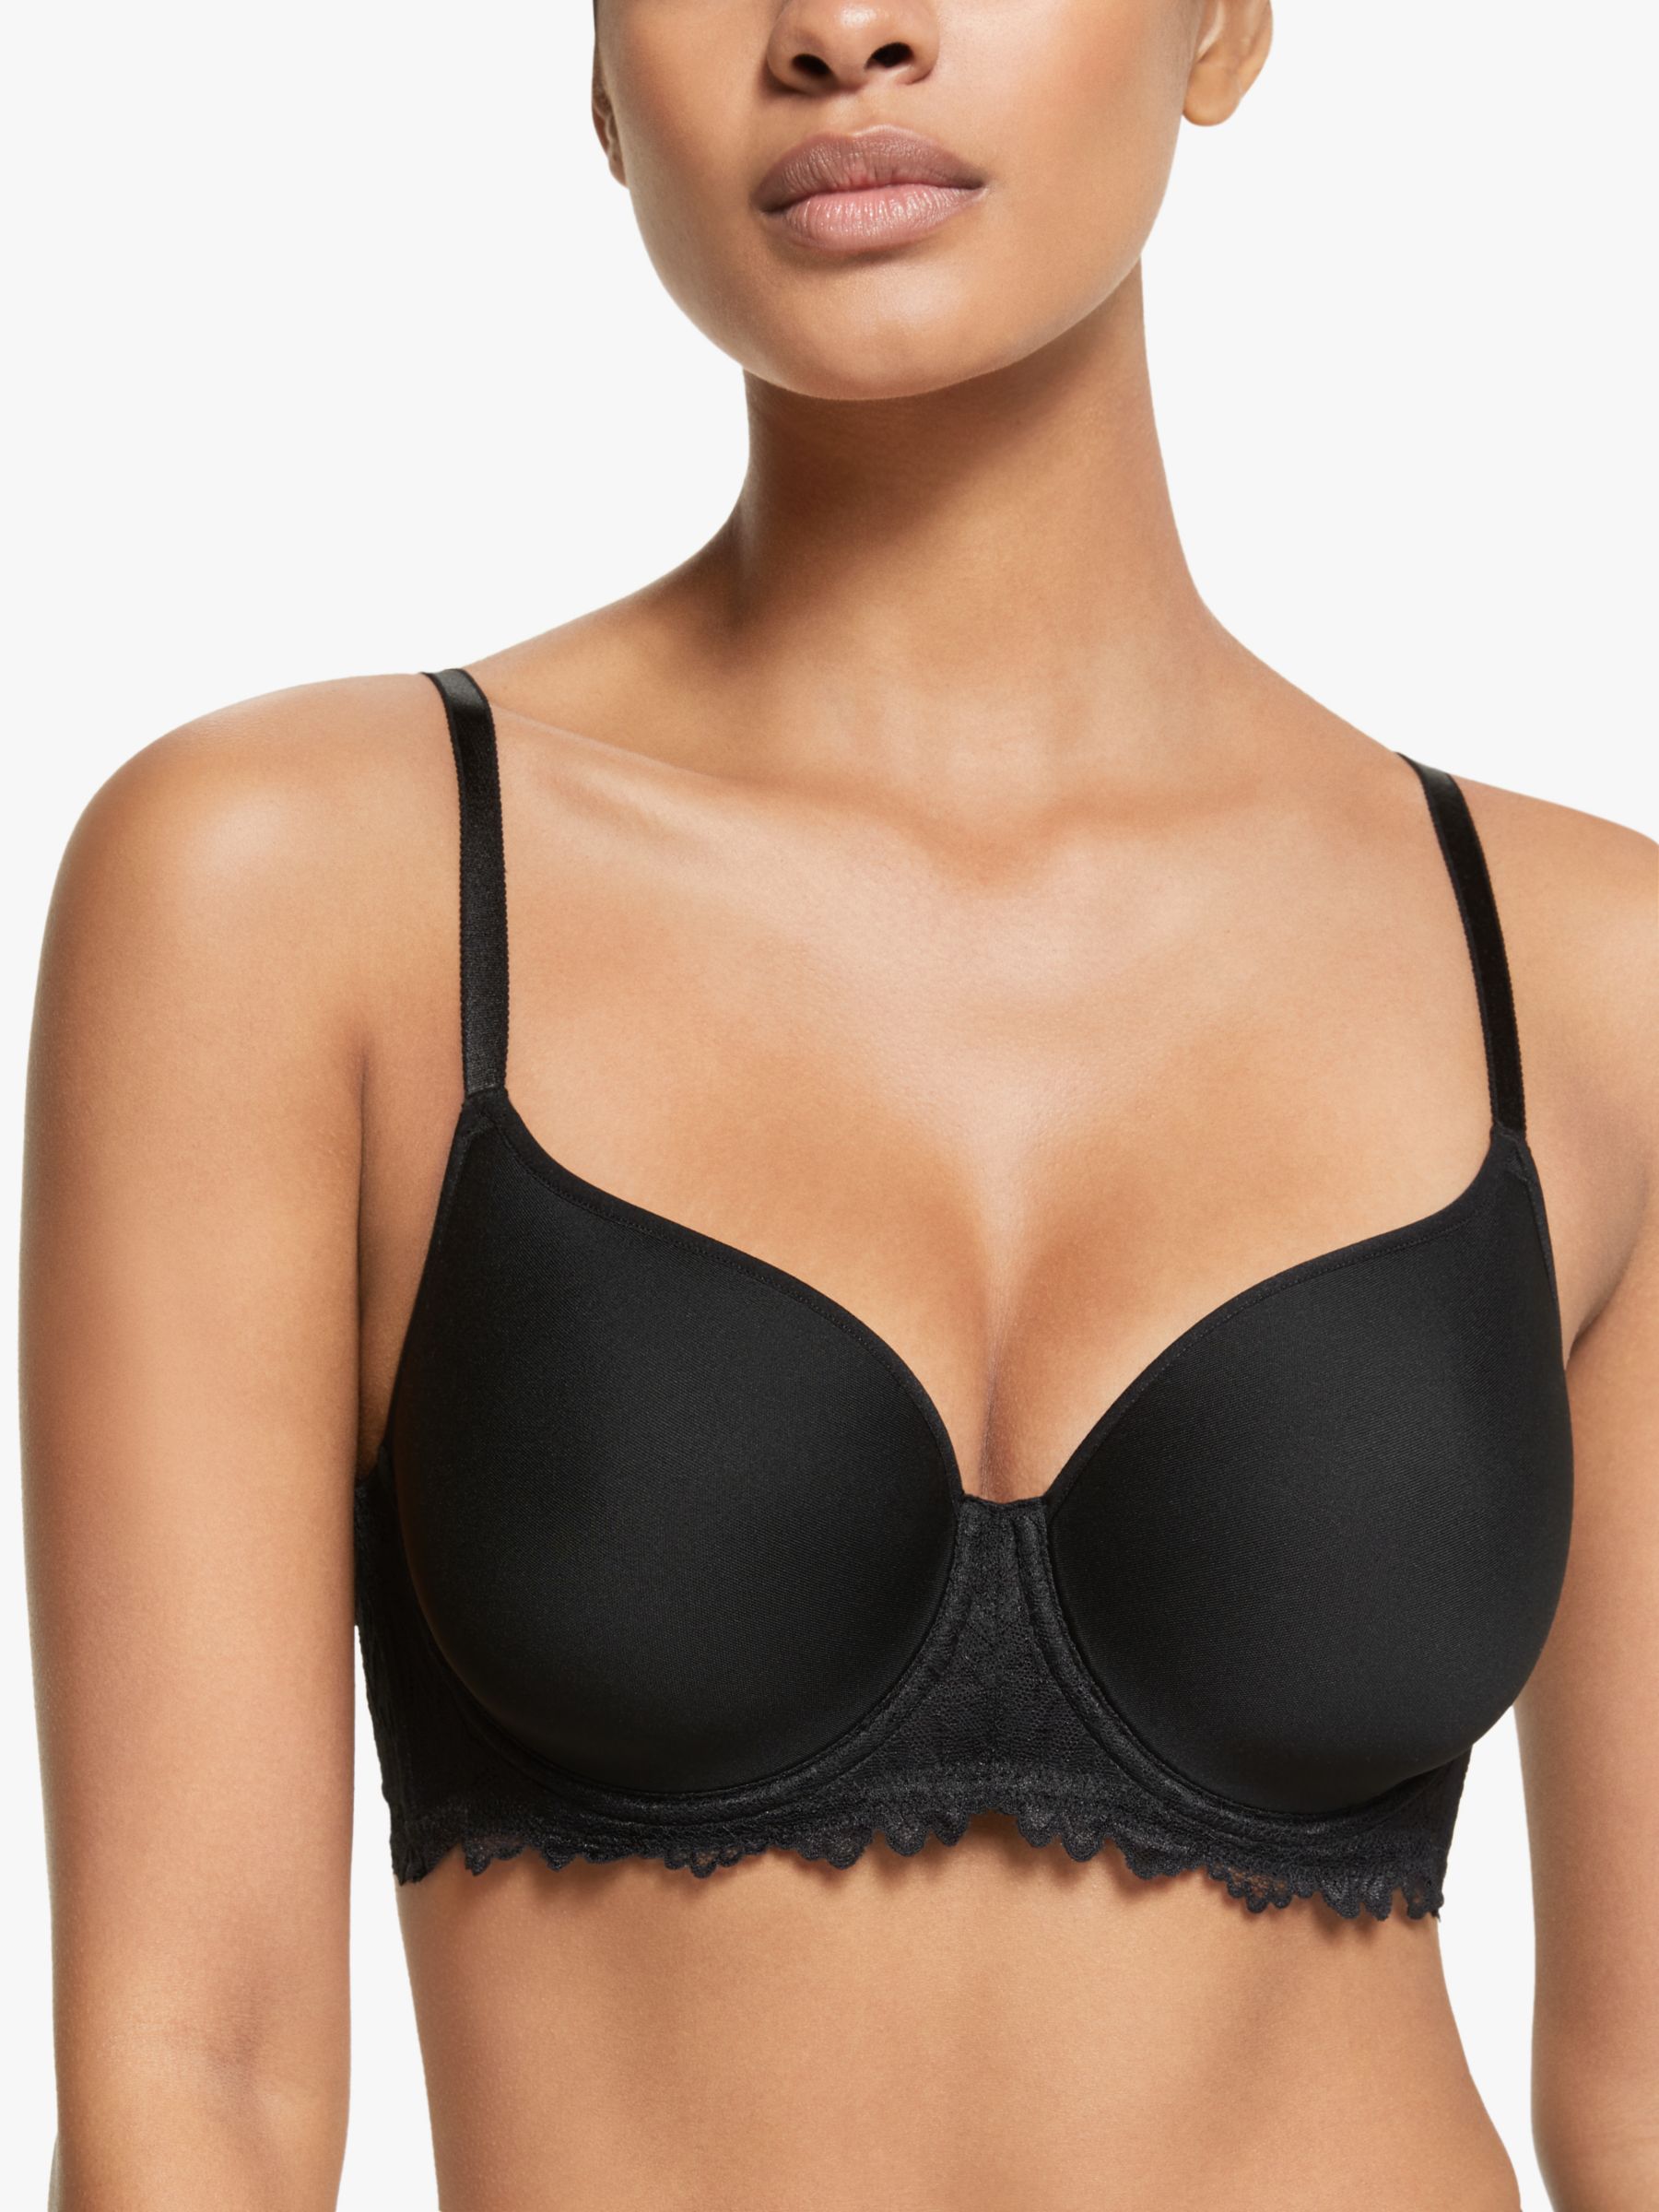 John Lewis Albany Lace Cradle Multiway Strapless Bra, Black at